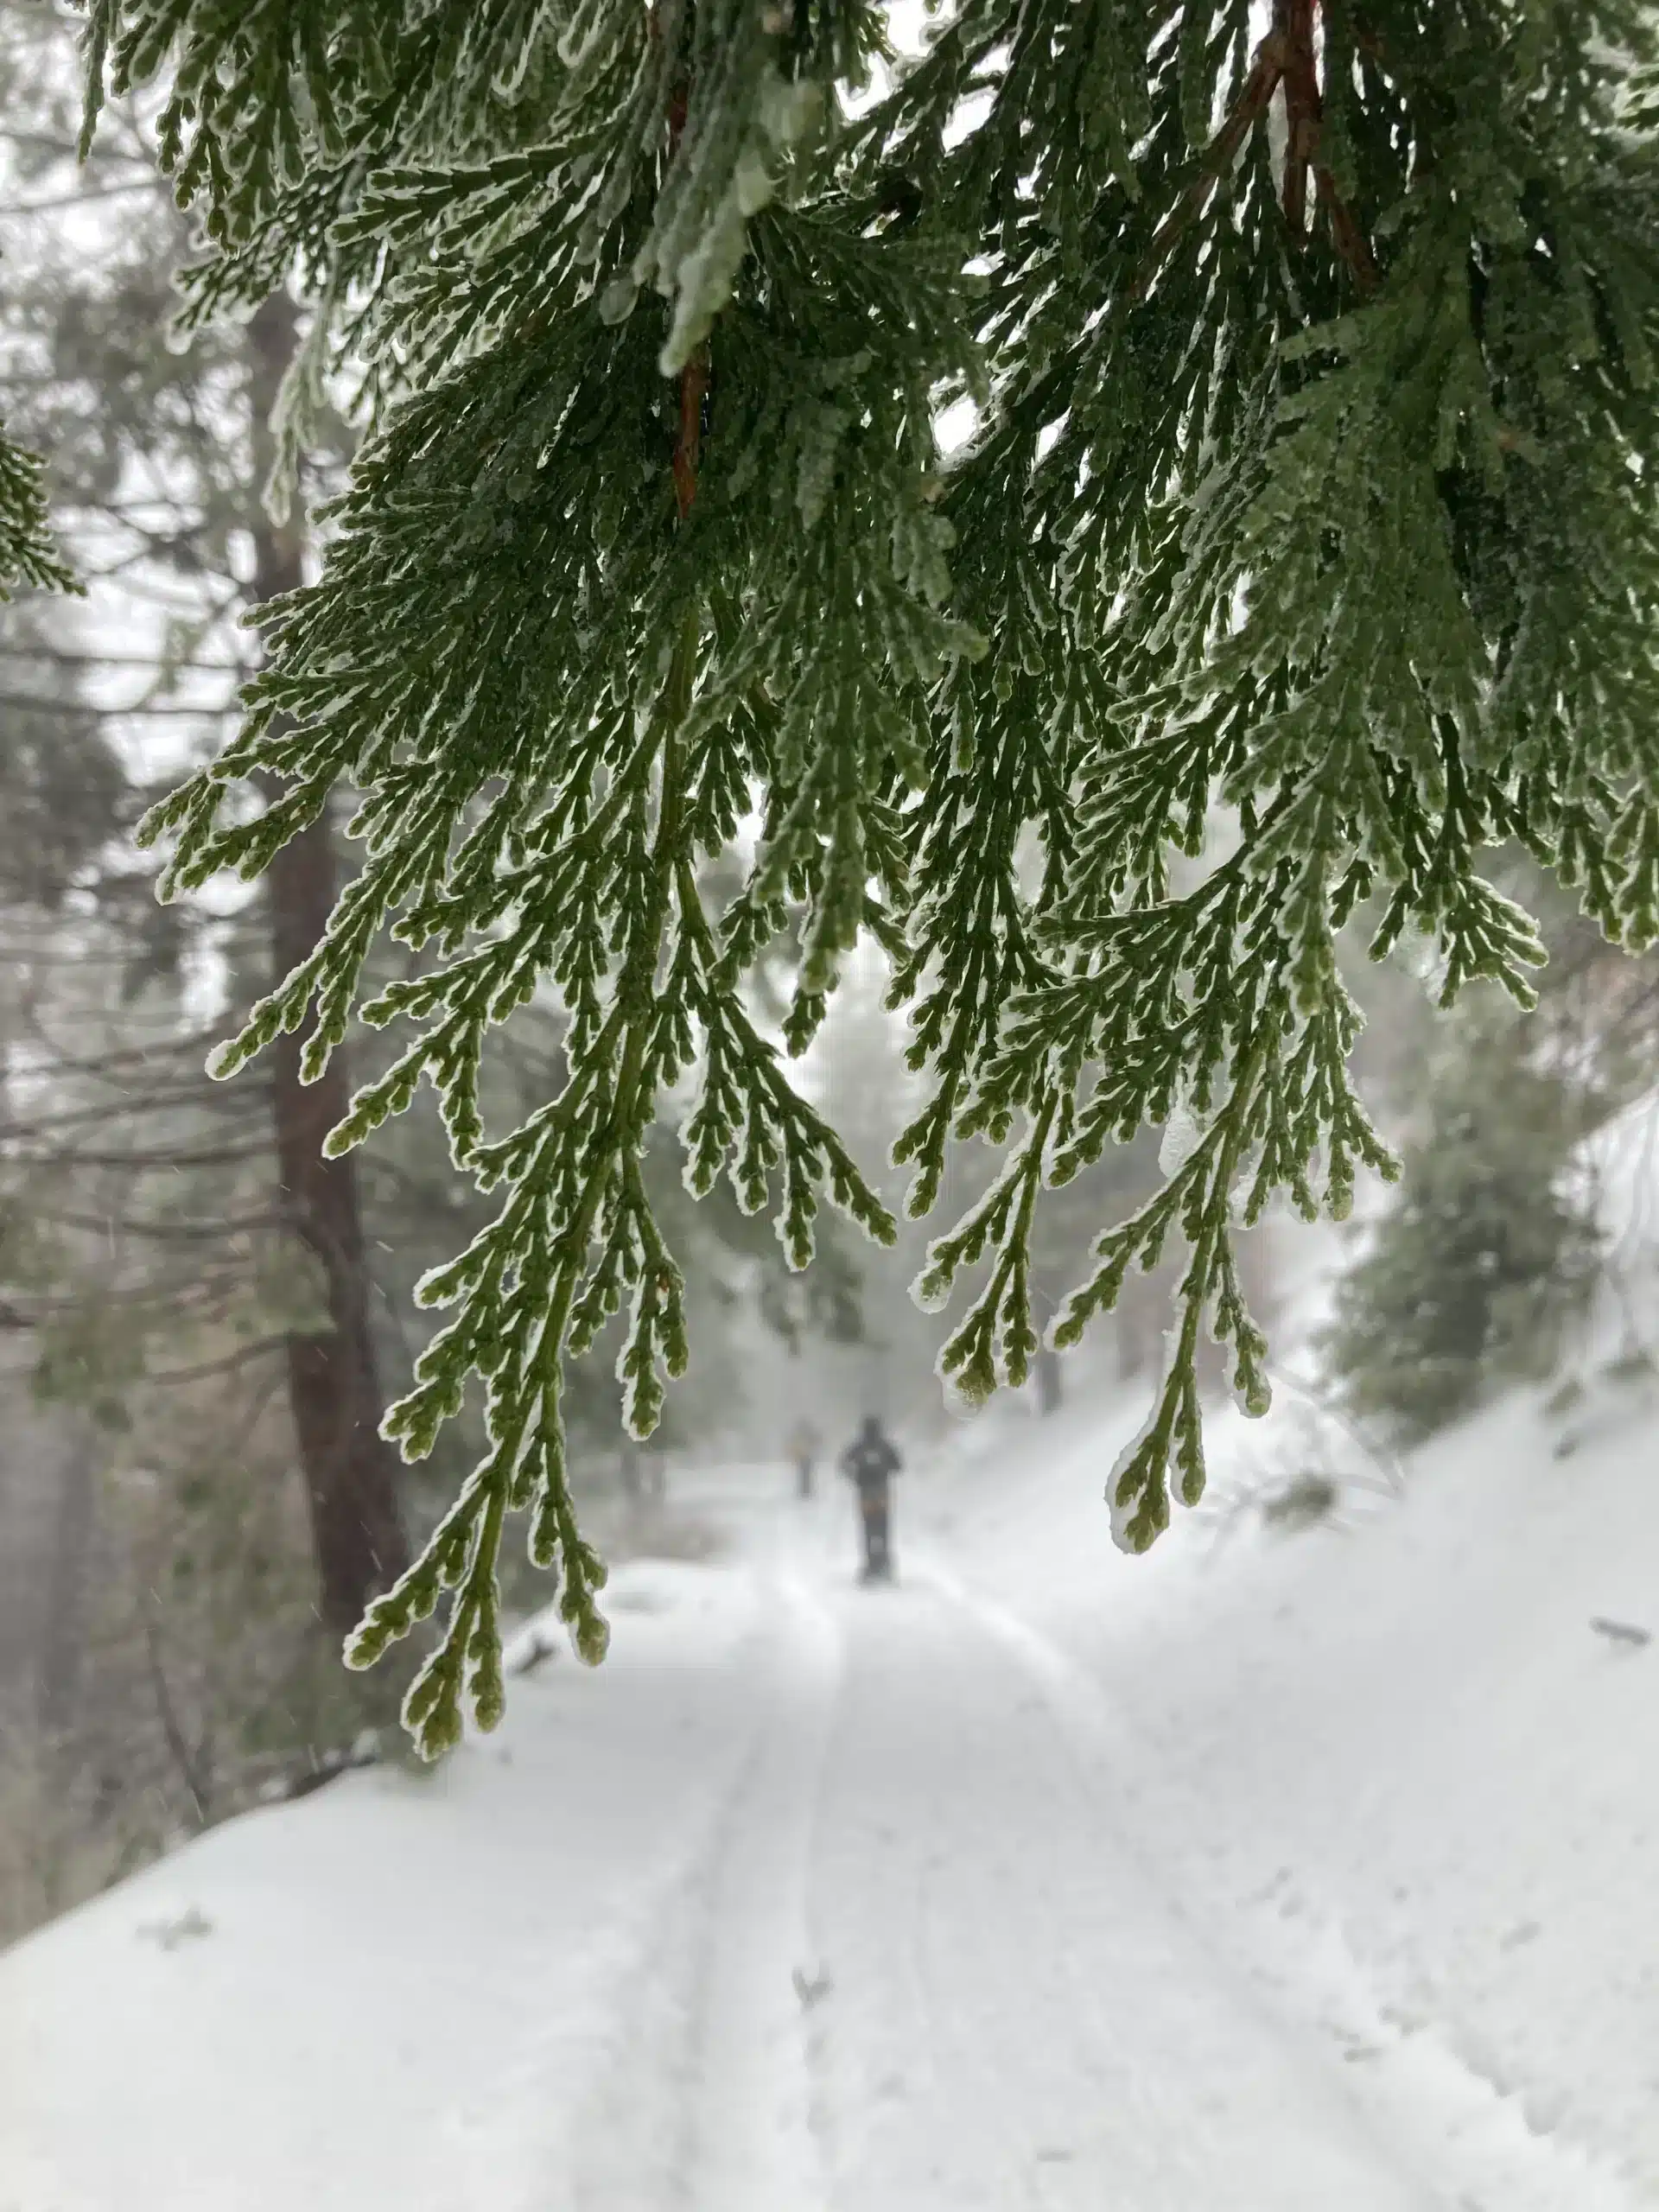 Close up of fir tree during winter with snowy hiking trail in background